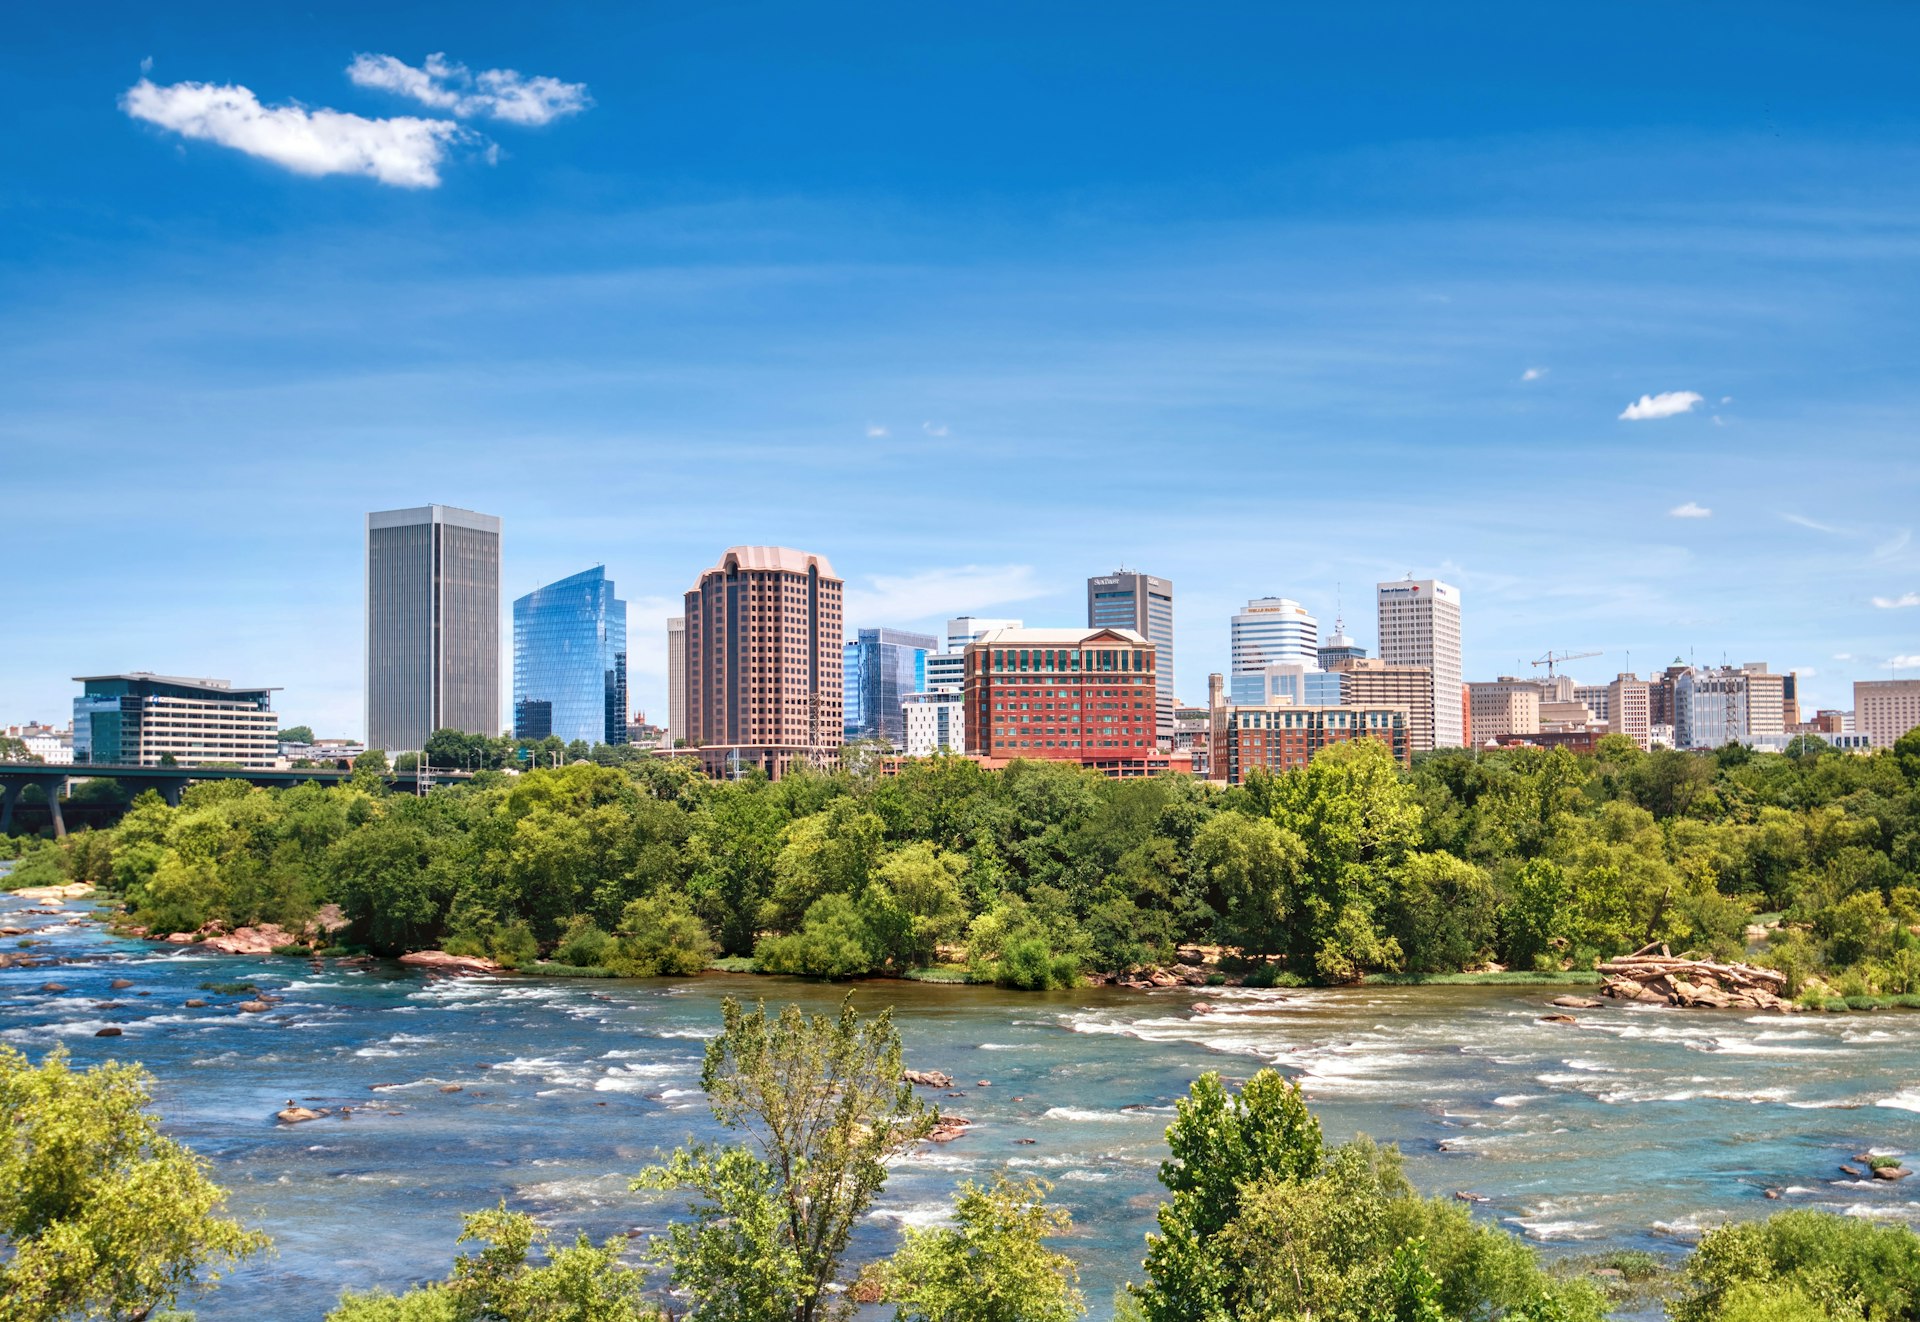 A view of the skyline of Richmond, Virginia, with the wide James River running in front of it.